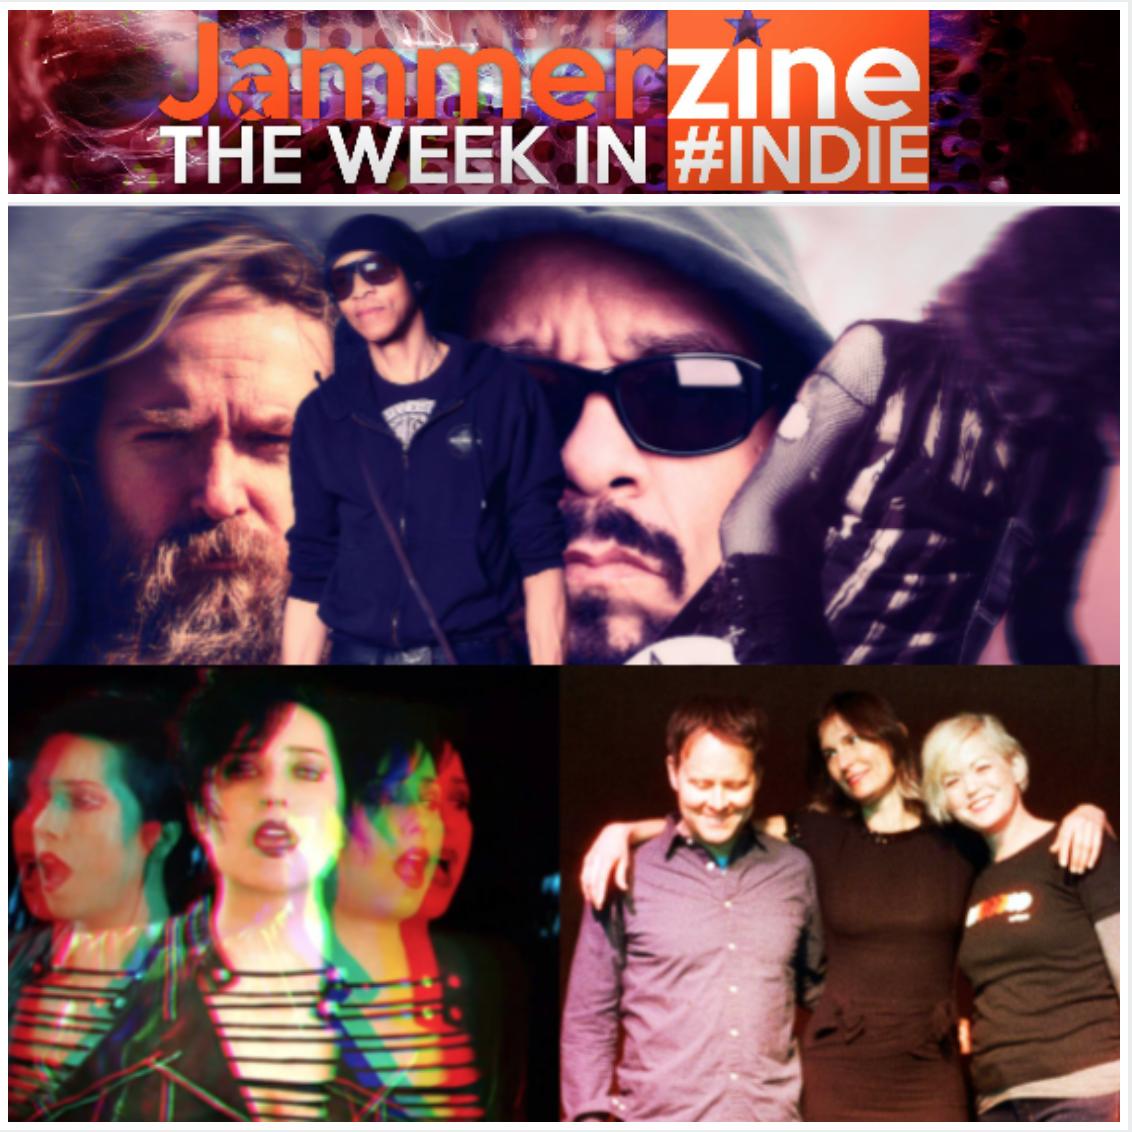 The new edition of @Jammerzine's The Week in #Indie features LUCKYANDLOVE @LuckyxLoveband @SlownessMusic @ErnestMoonMusic and Beauty In Chaos @MichaelCiravolo feat. @dUgPinnick_ of @KingsX @ZakkWyldeBLS Ice-T @FinalLevel and @PeteParada ~ Watch it at jam2.me/twiis5e5